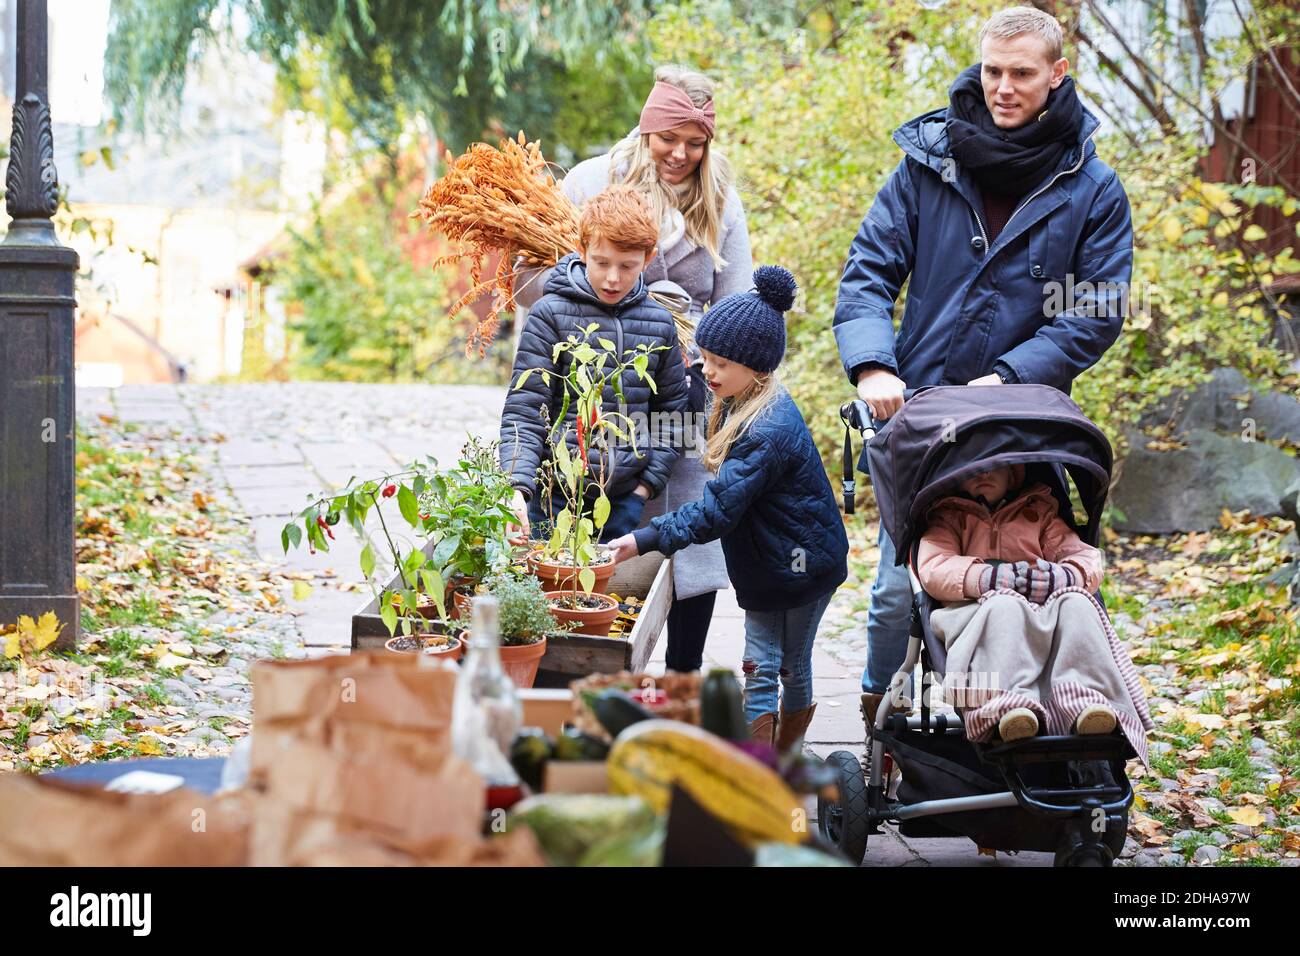 Family arriving at market stall Stock Photo